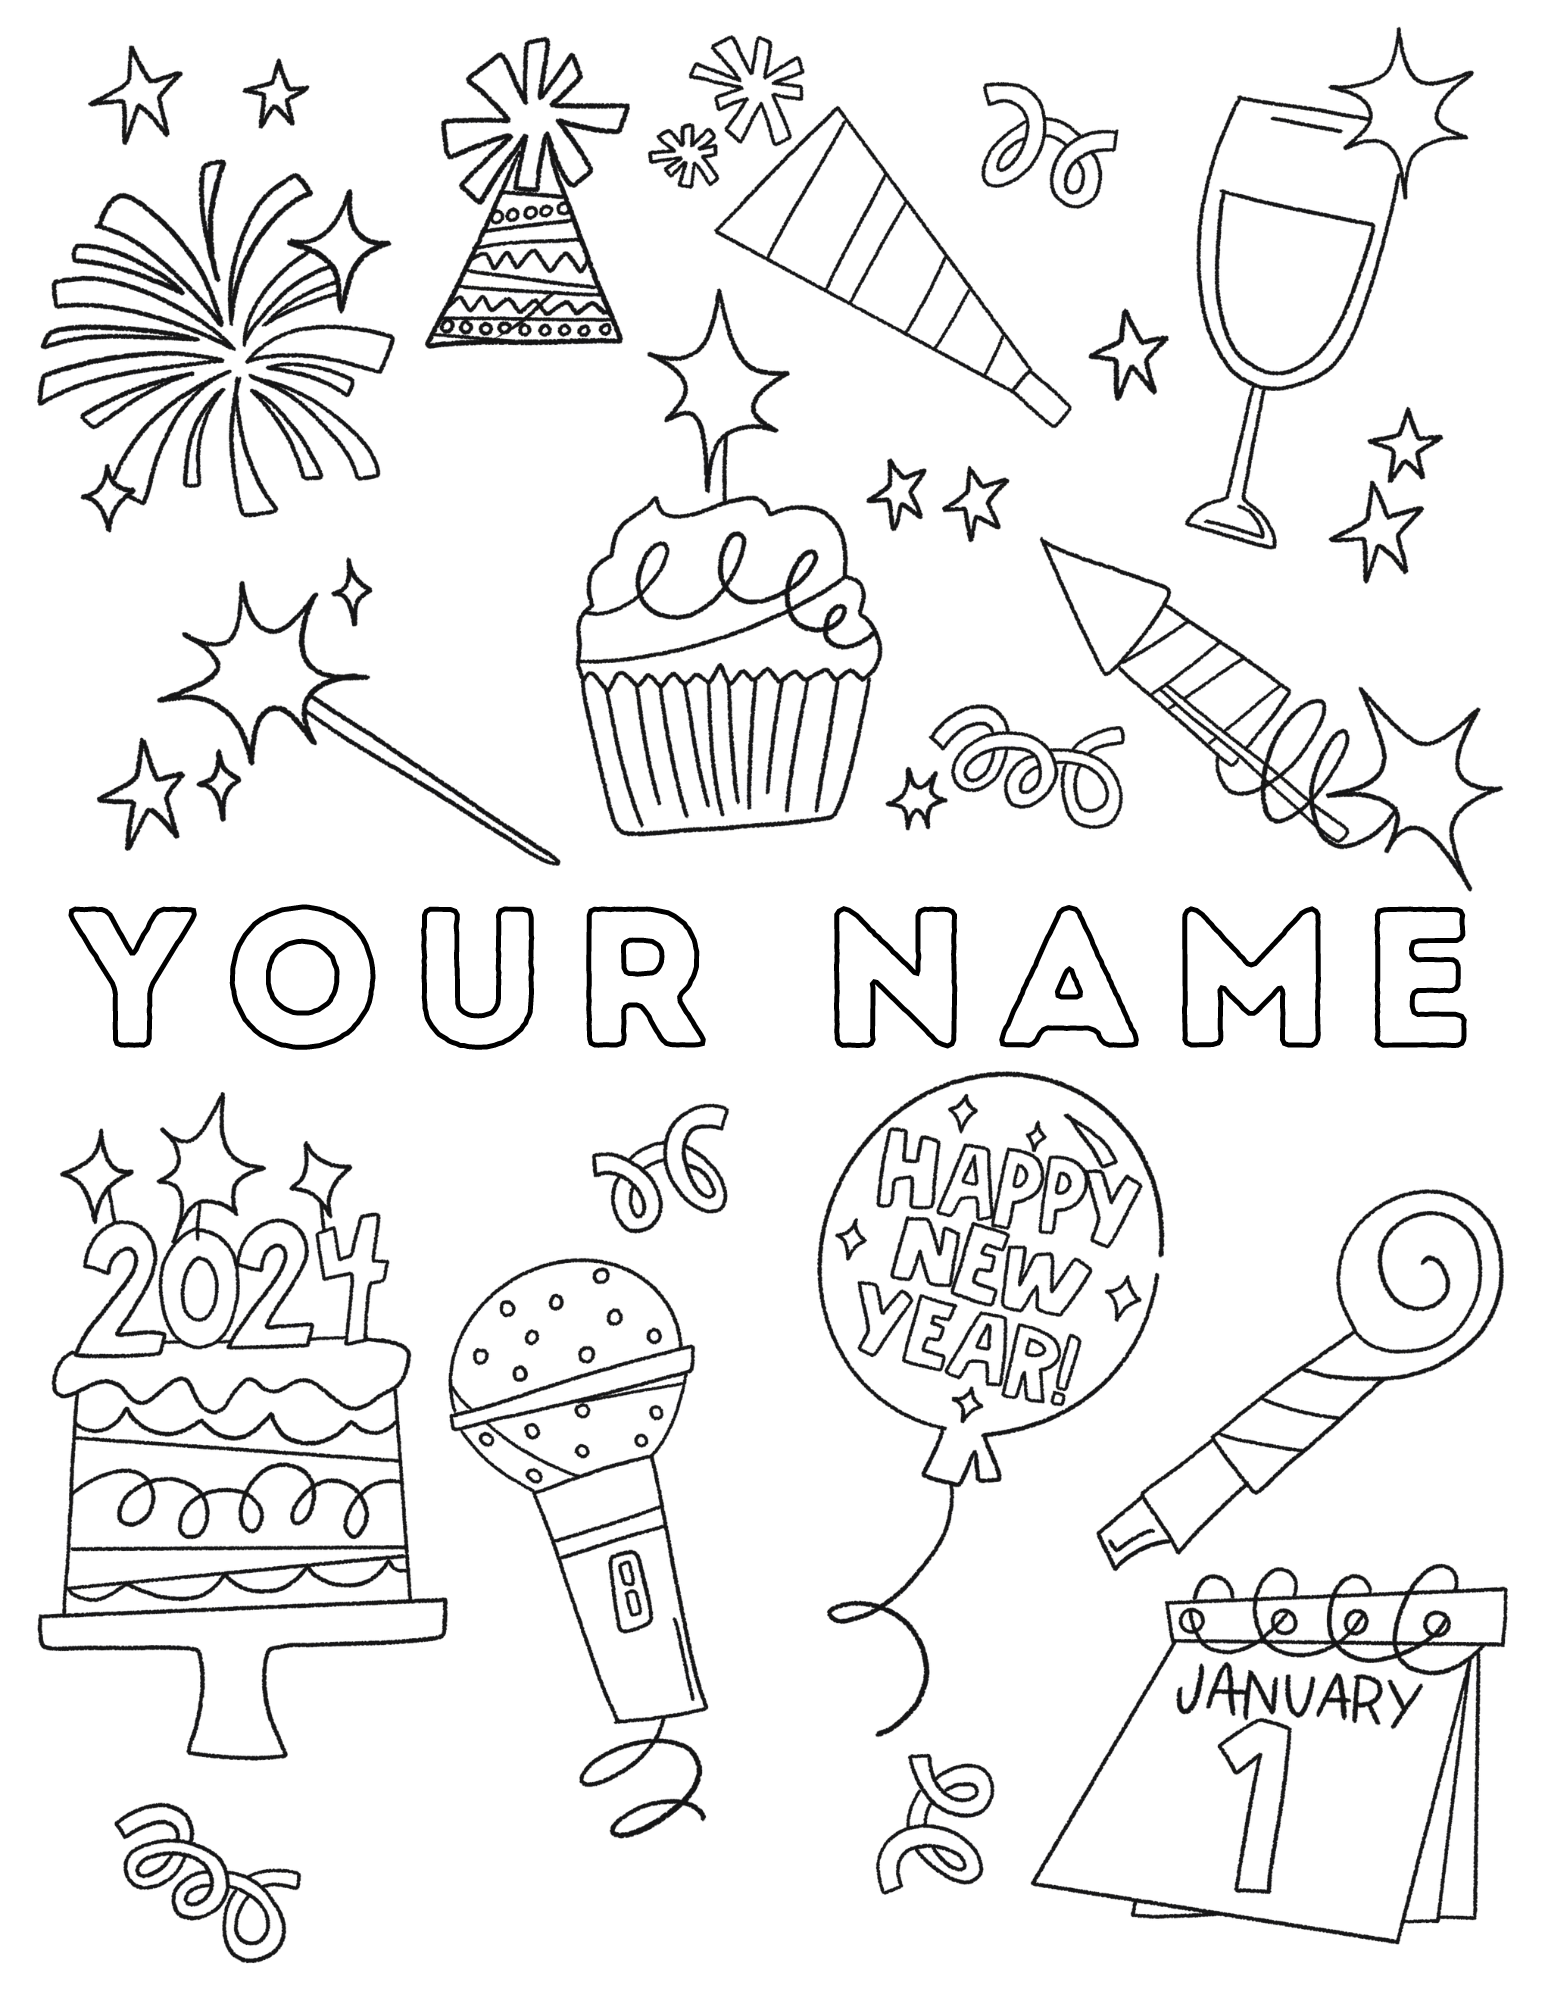 Custom new years name coloring page â the letter vee